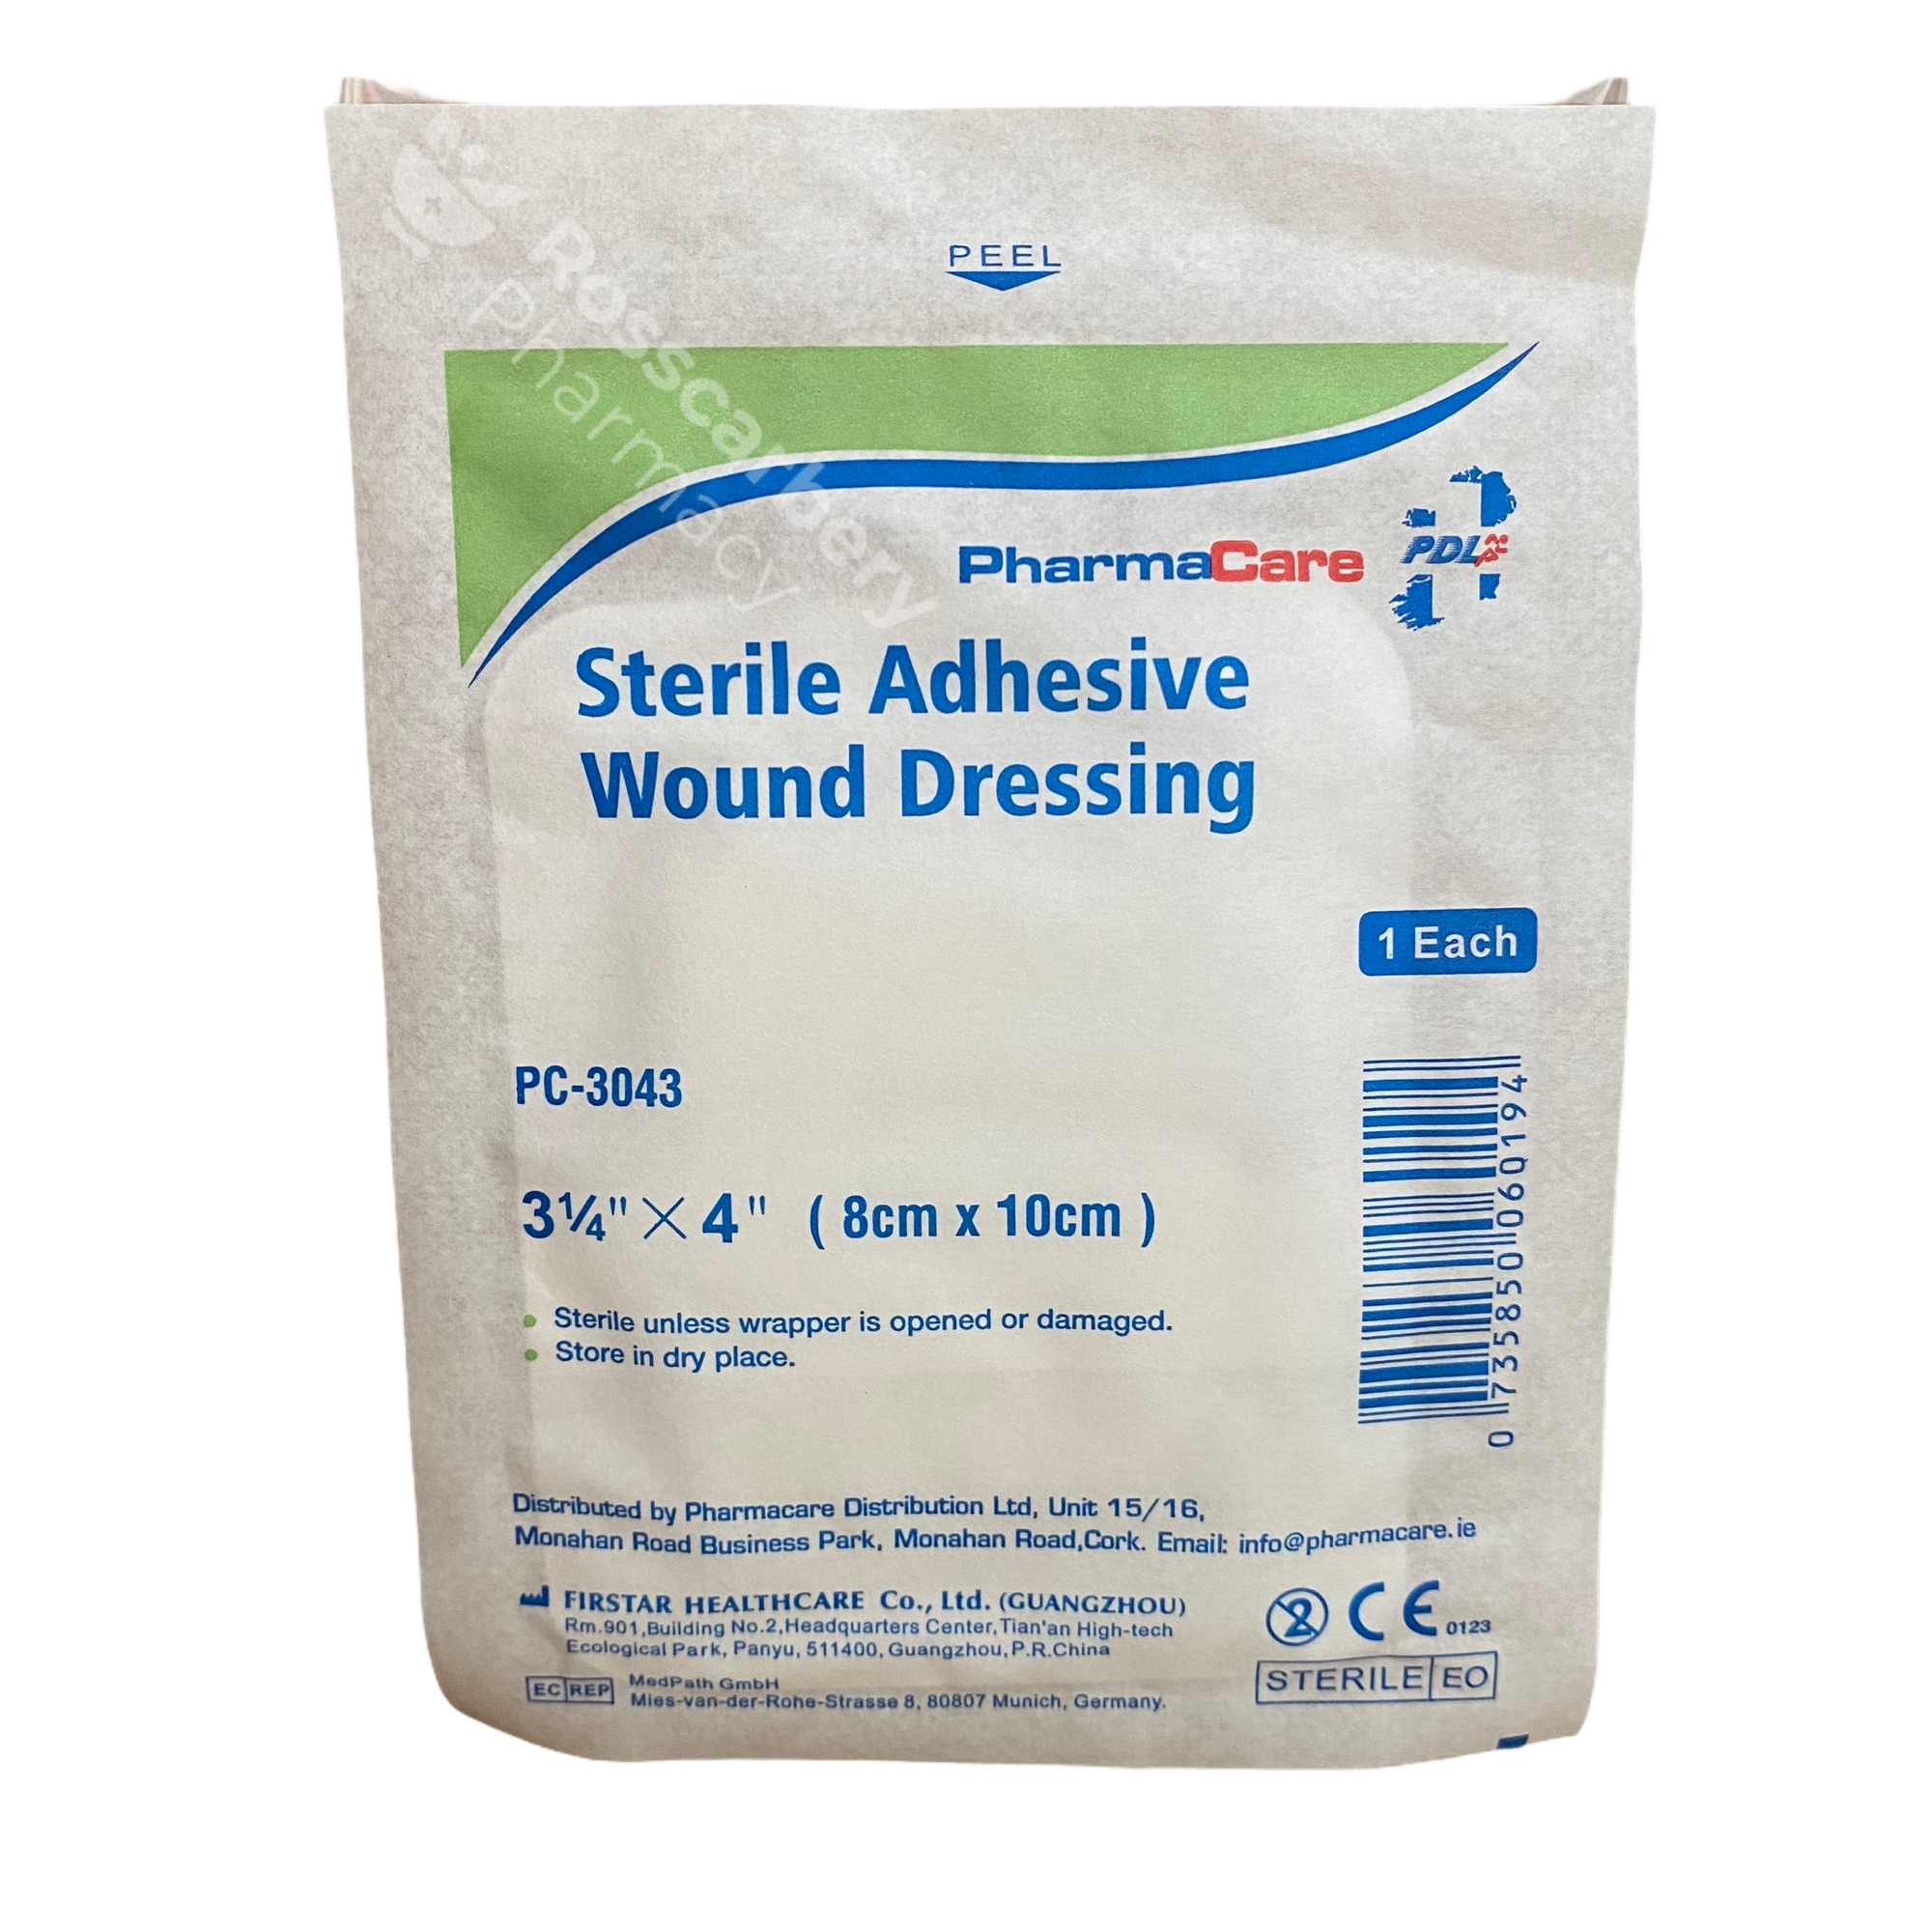 PharmaCare Sterile Adhesive Wound Dressing (8cm x 10cm) - Single